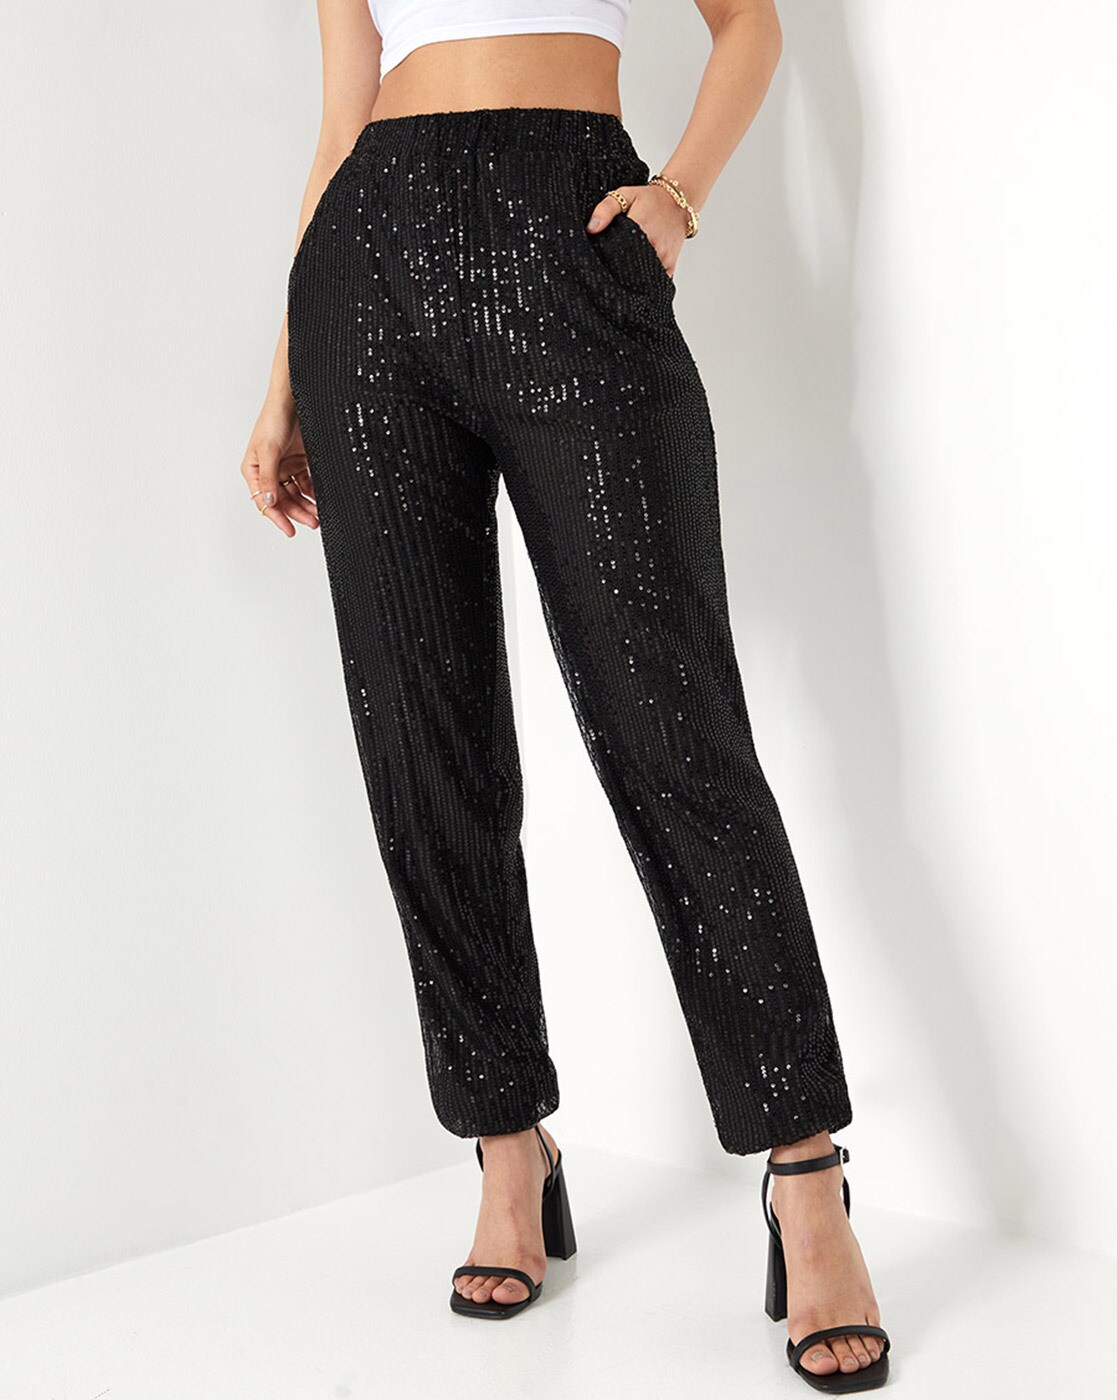 Black Sequin High Waist Tailored Flared Trousers  PrettyLittleThing IL